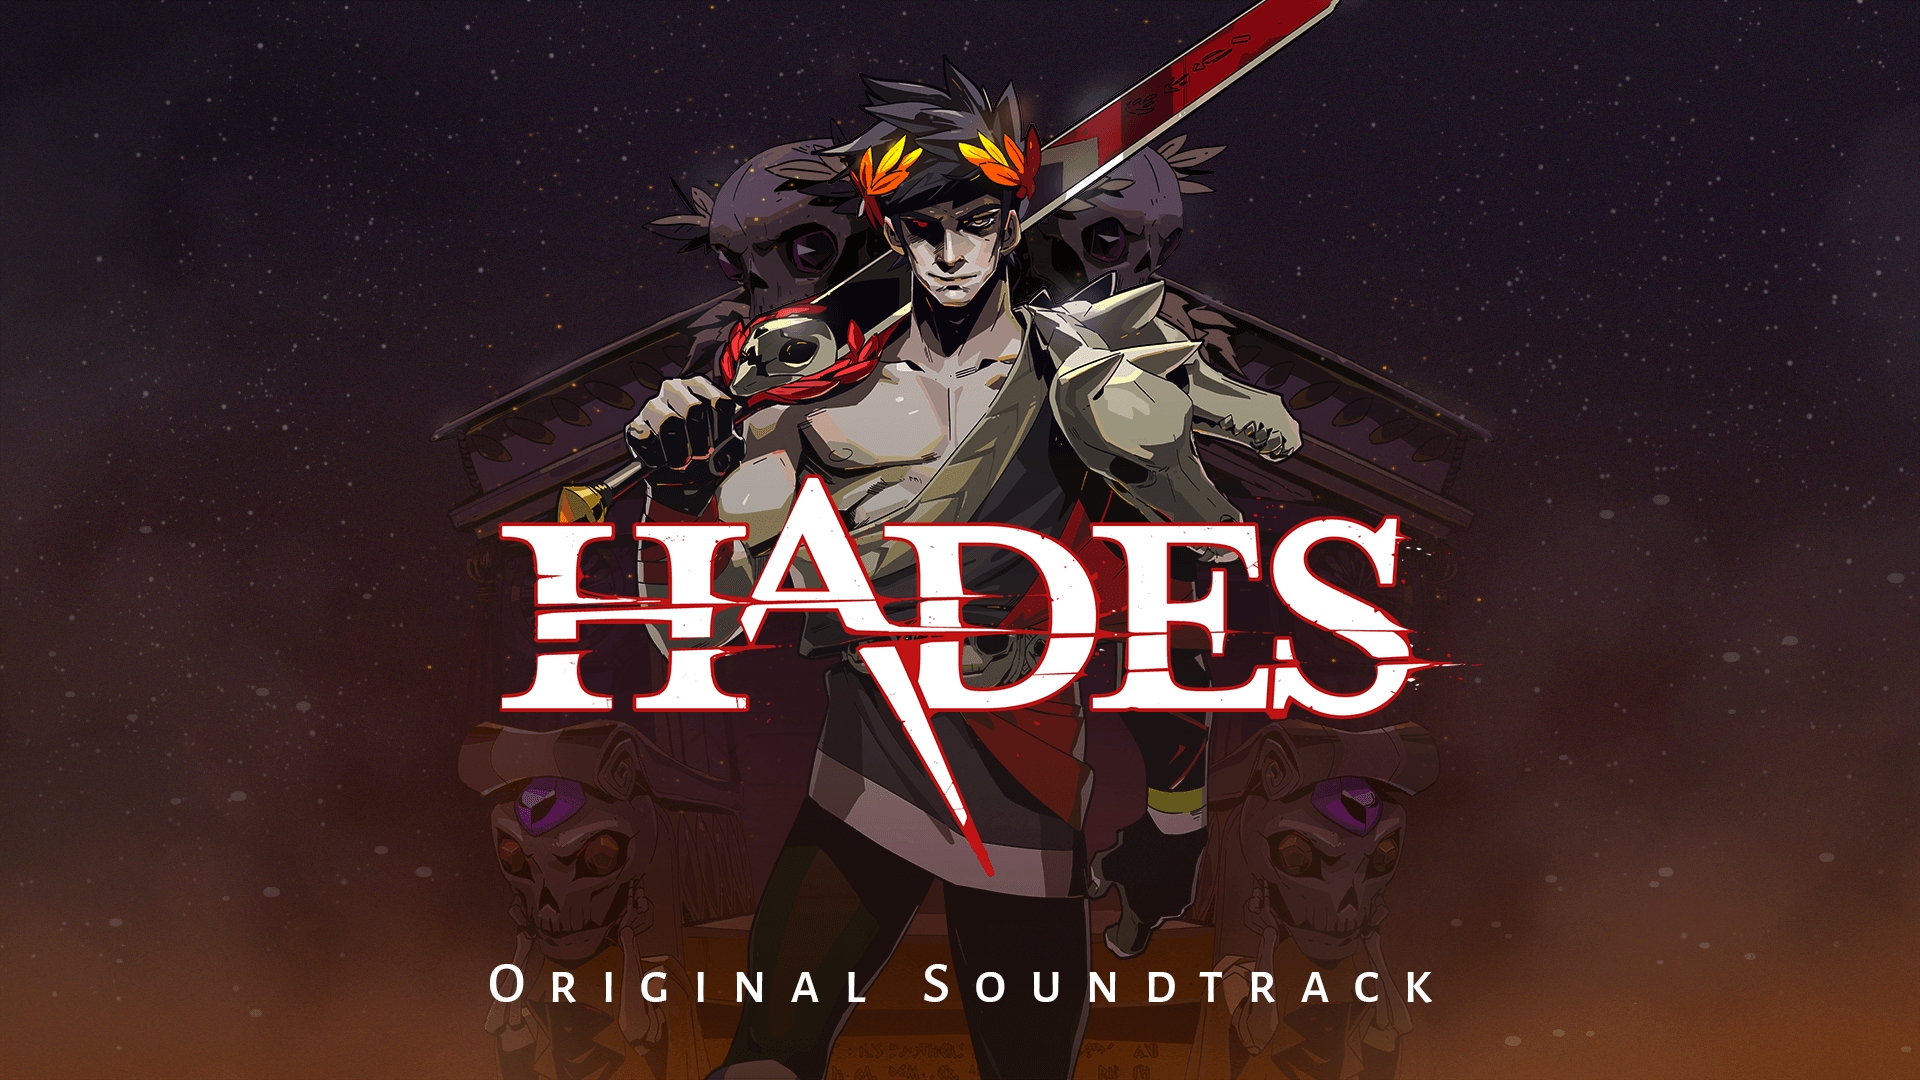 How Rock Band influenced Hades' soundtrack – Laced Records